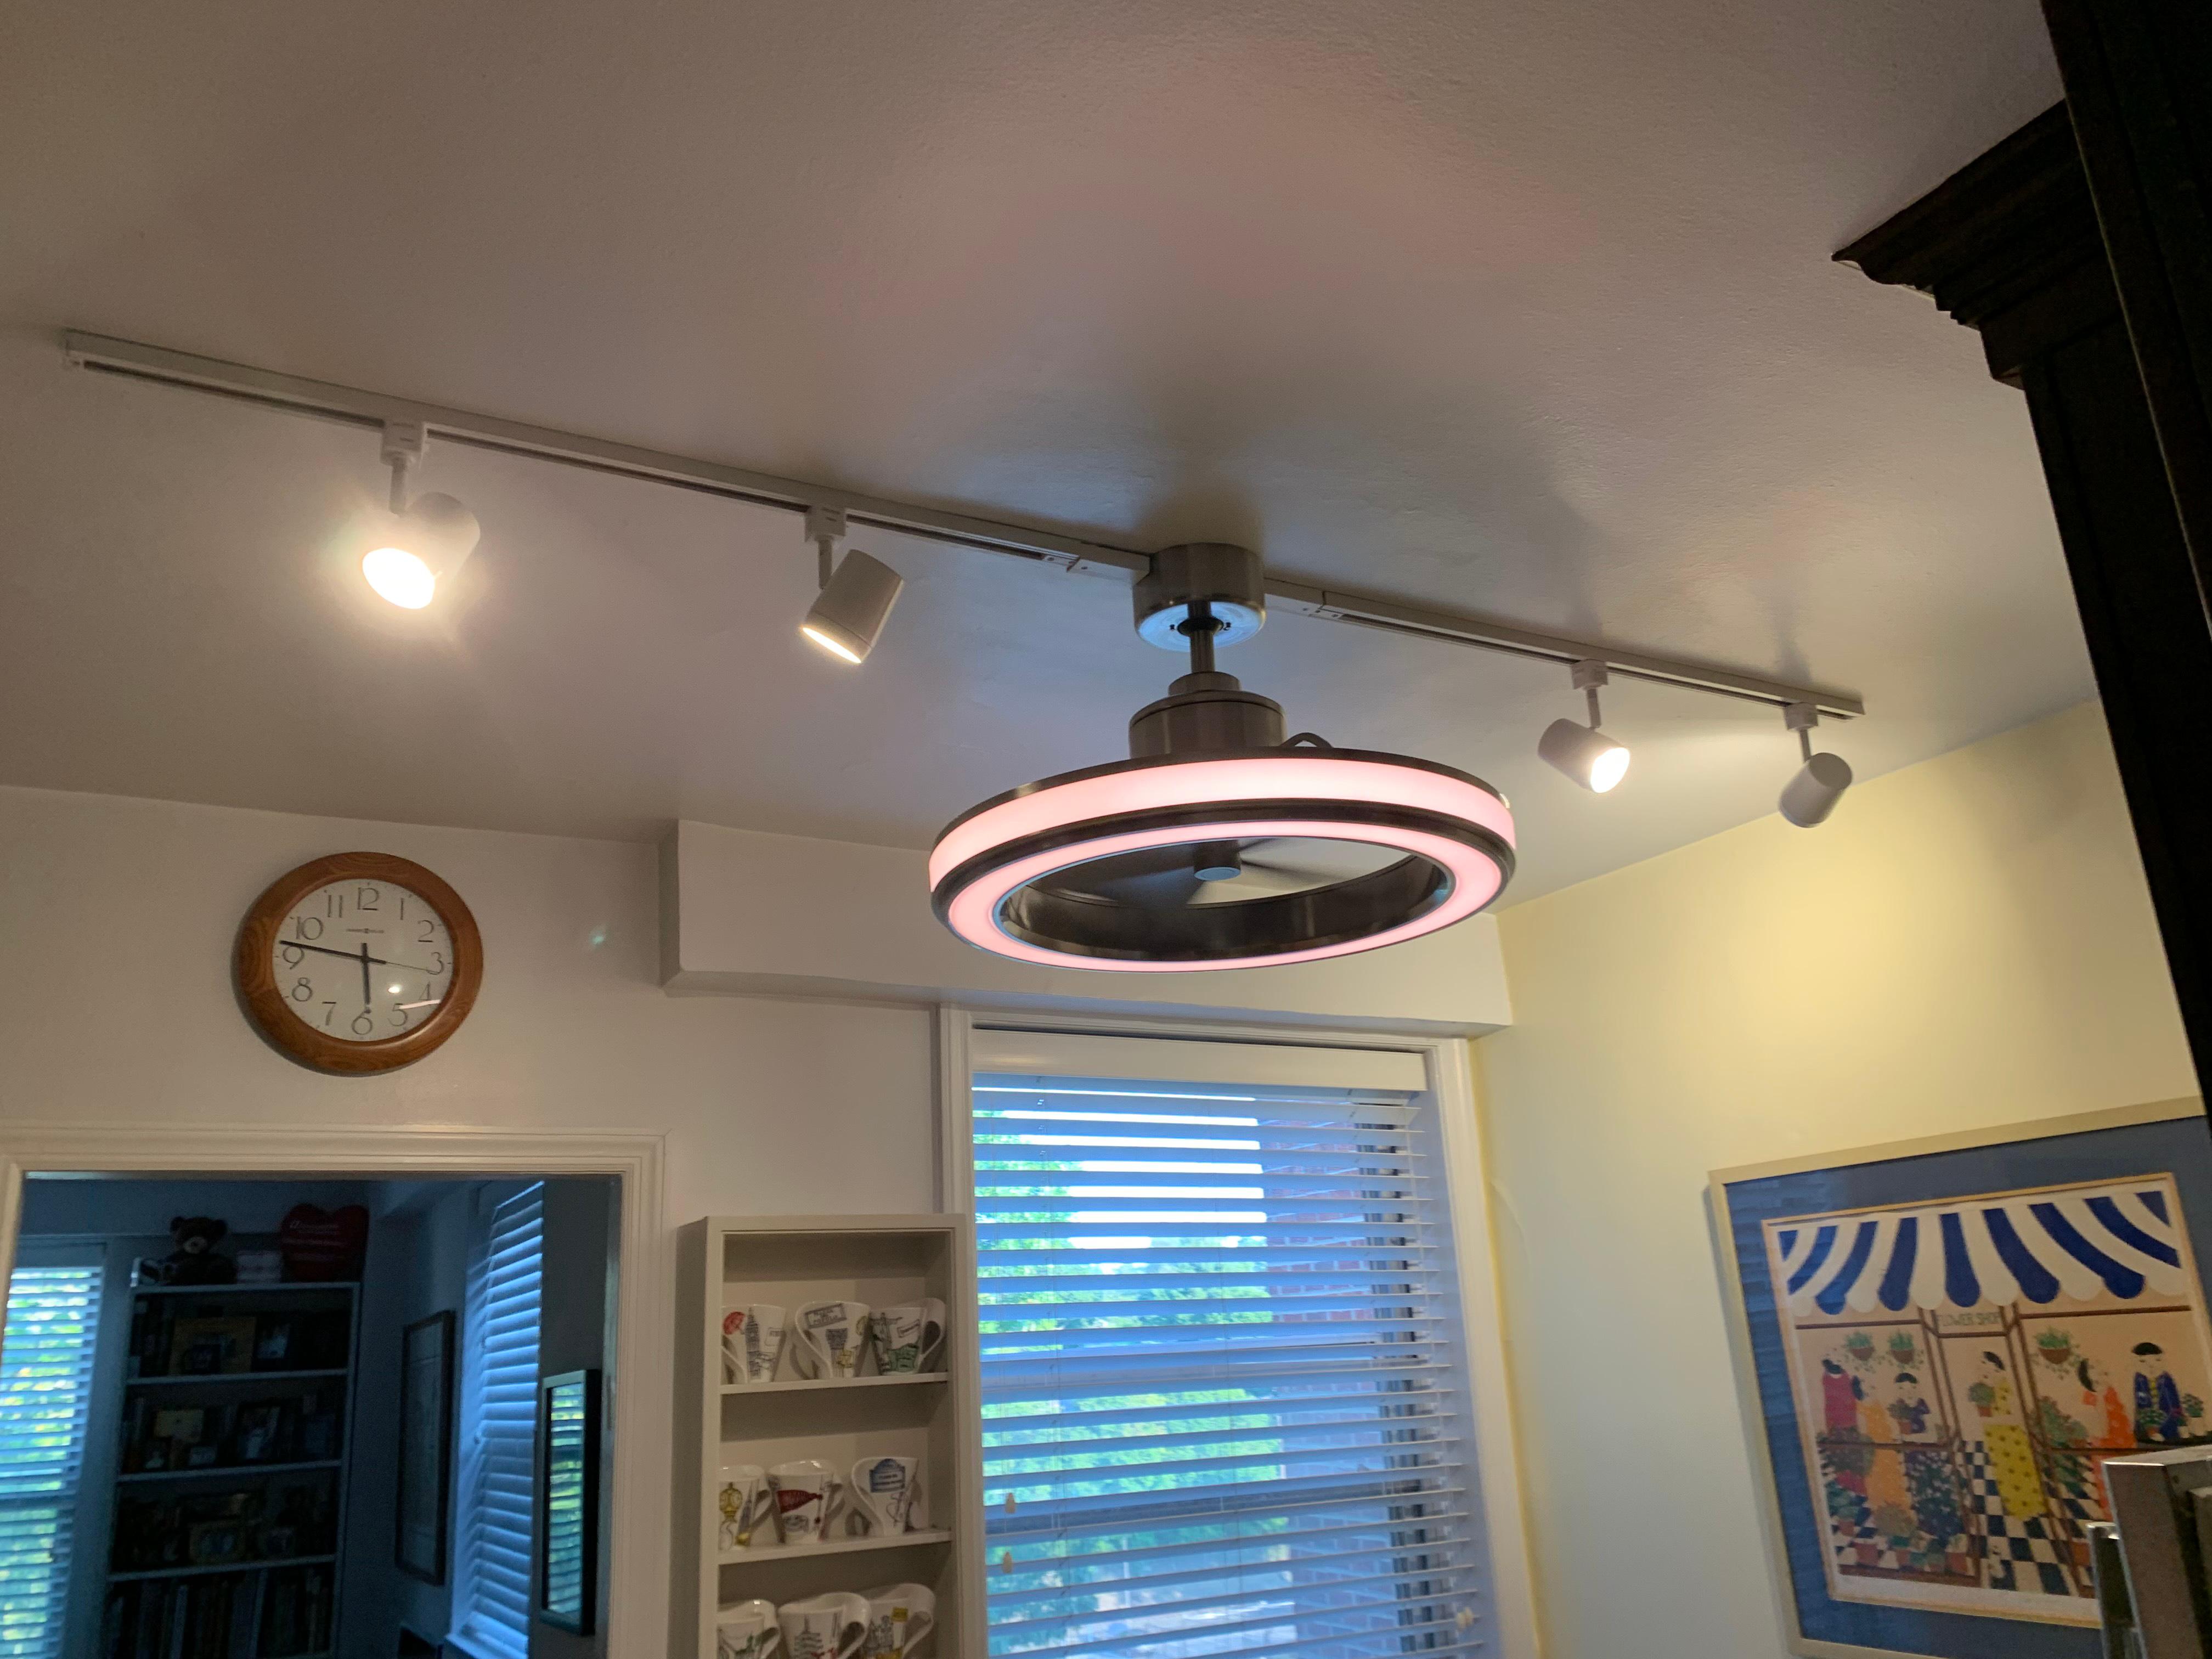 Powerone Home Service, LLC is your trusted local electrician in Mahopac, NY. We offer responsive and reliable electrical services, providing peace of mind to our community through our expertise and commitment to customer satisfaction.